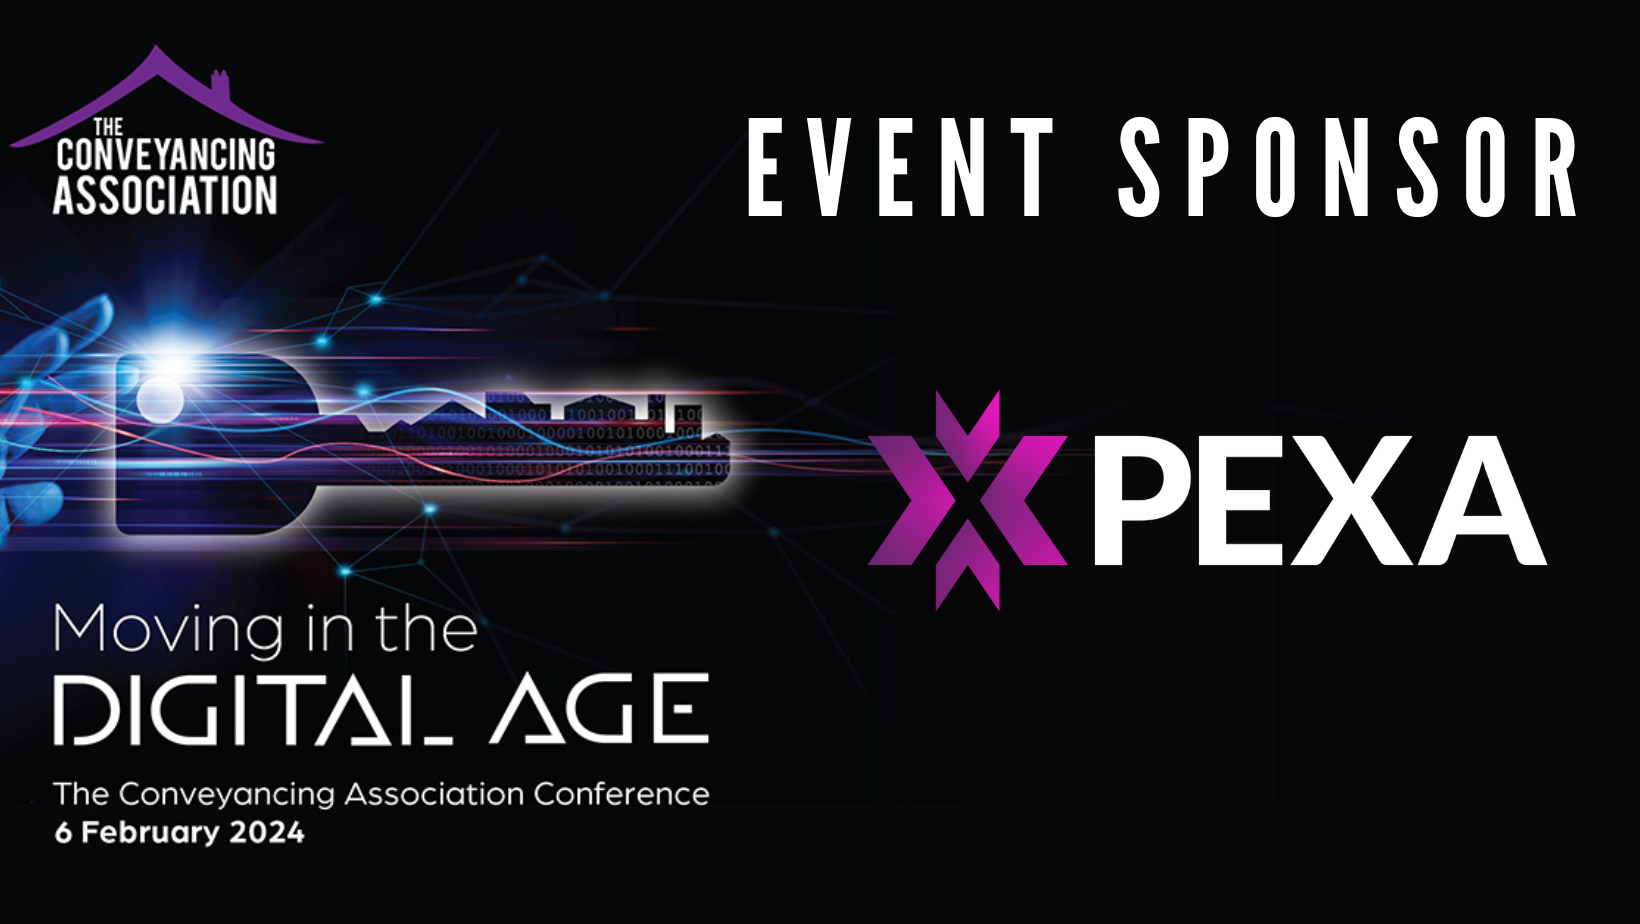 PEXA announced as Event Sponsor of Conveyancing Association Annual Conference – ‘Moving in the Digital Age’